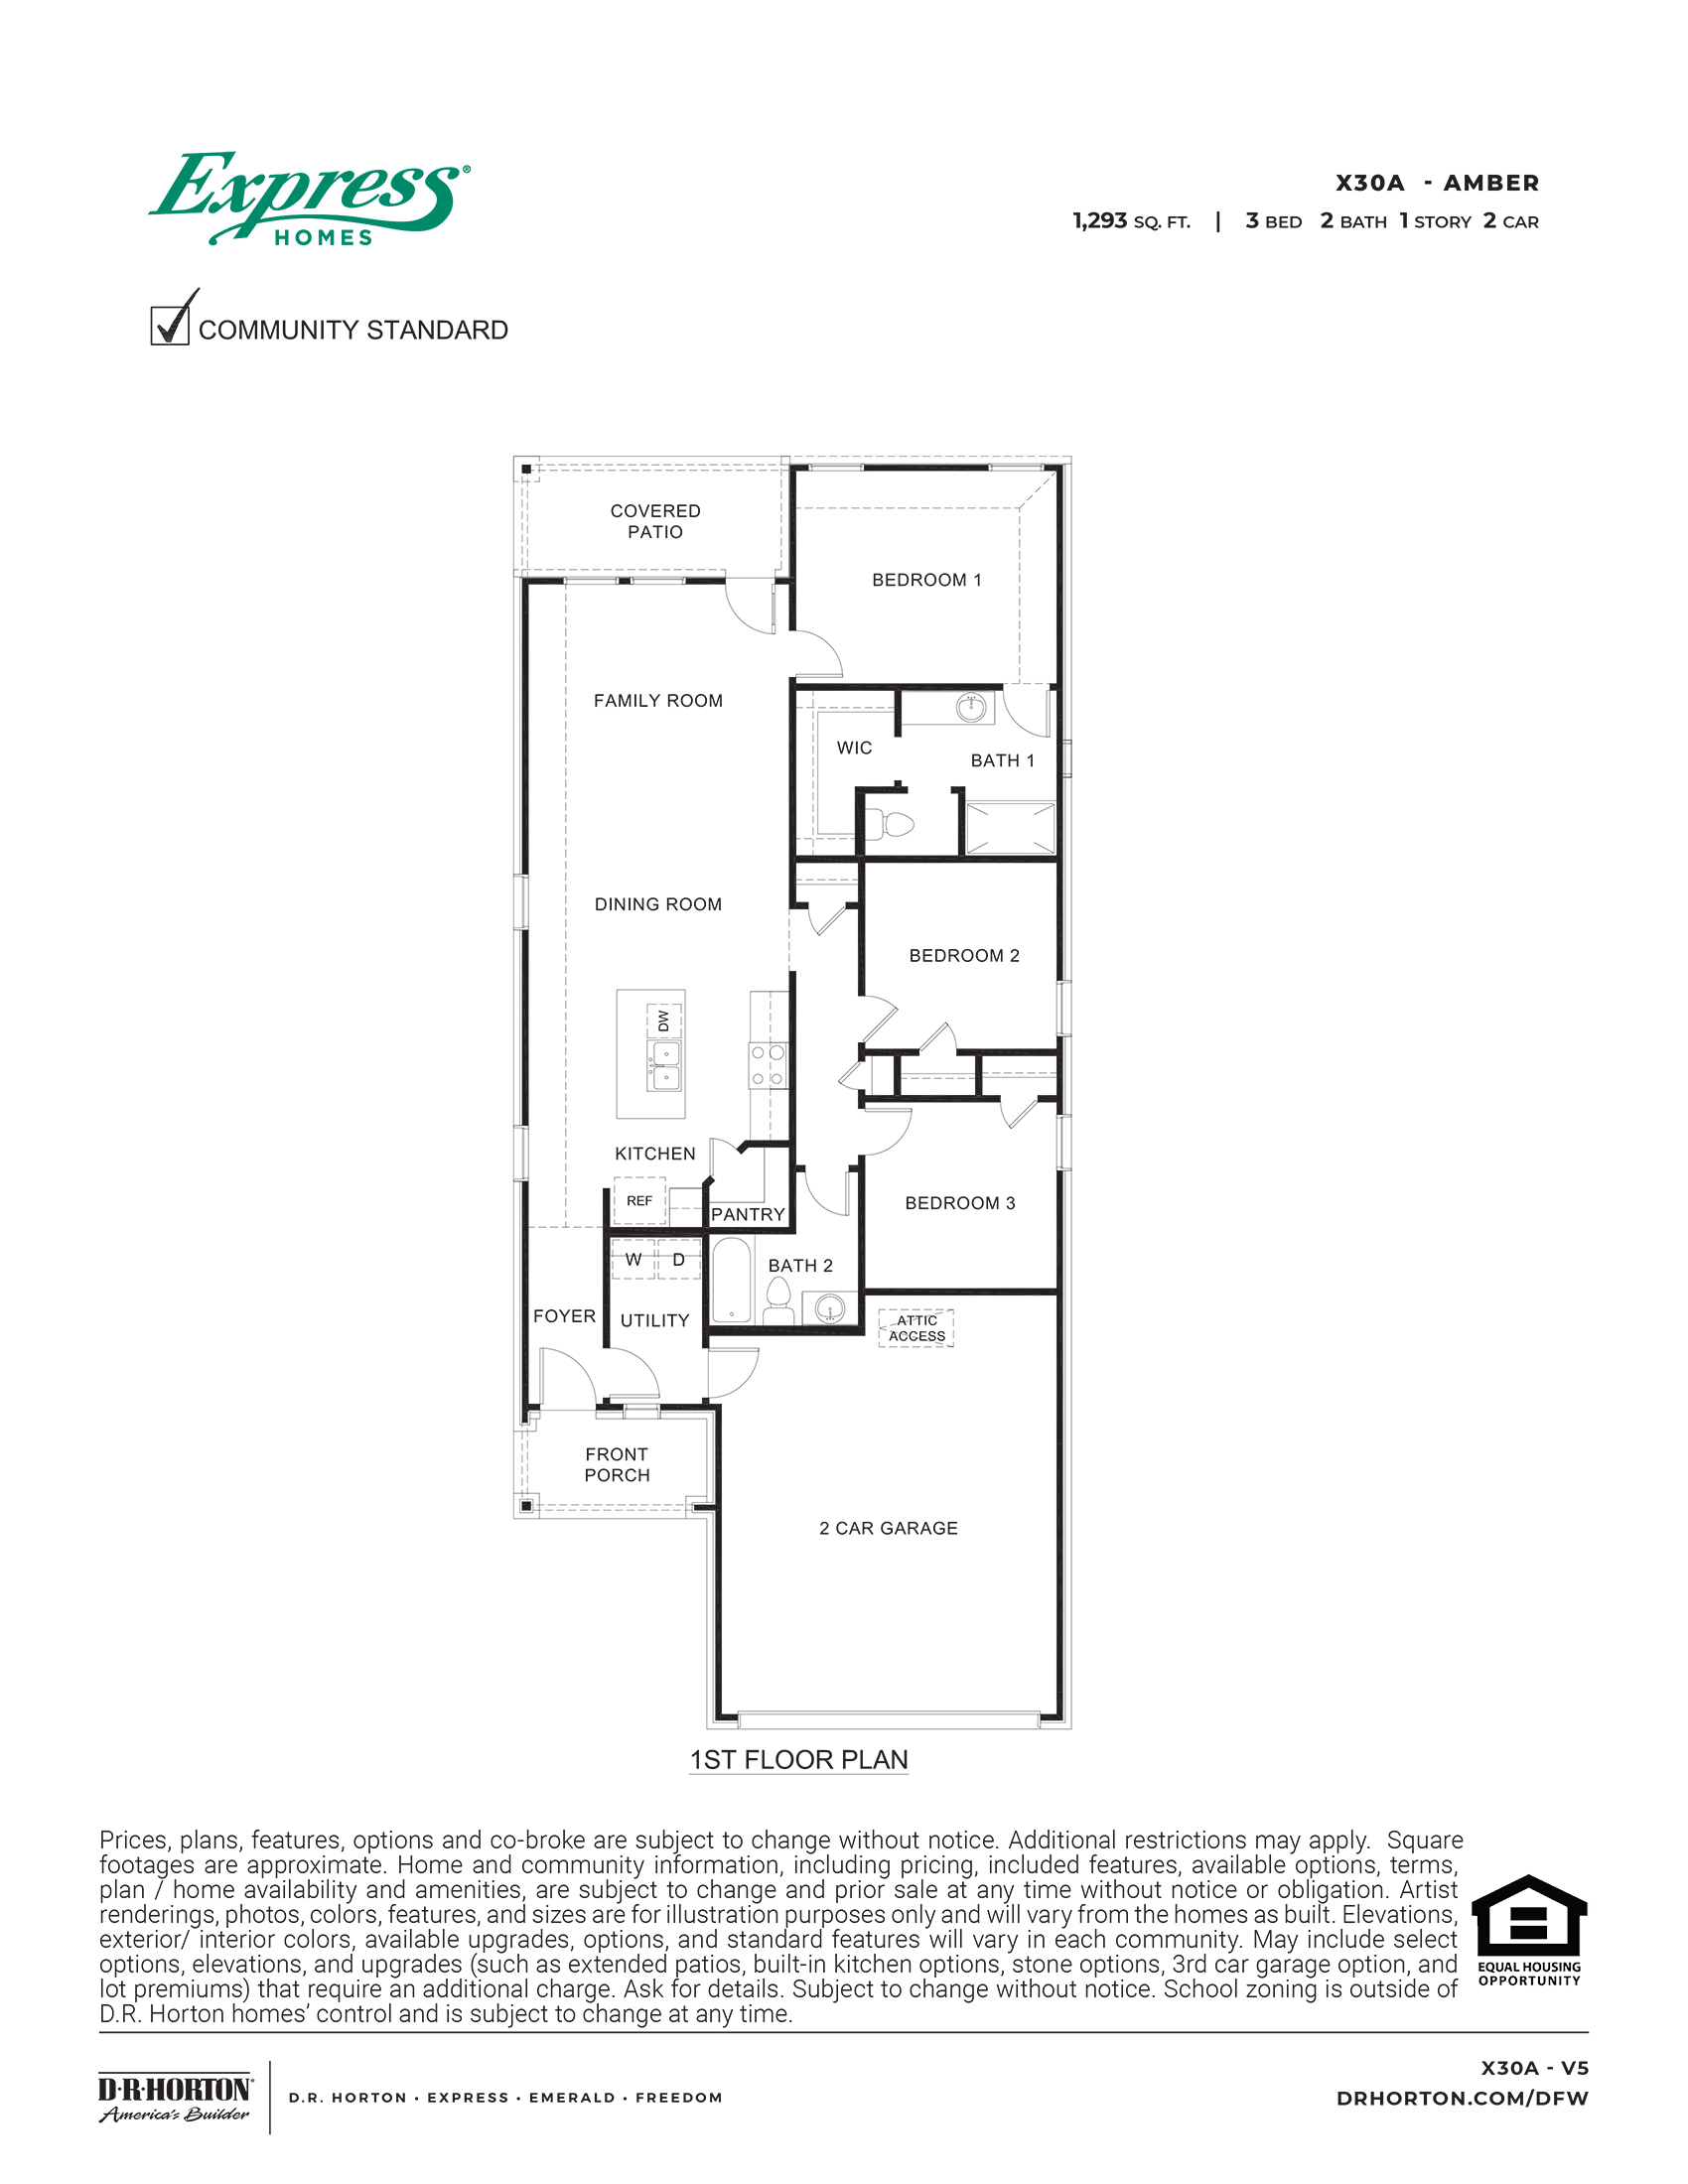 X30A Amber floorplan rendering - Governor's Lots in Forney TX